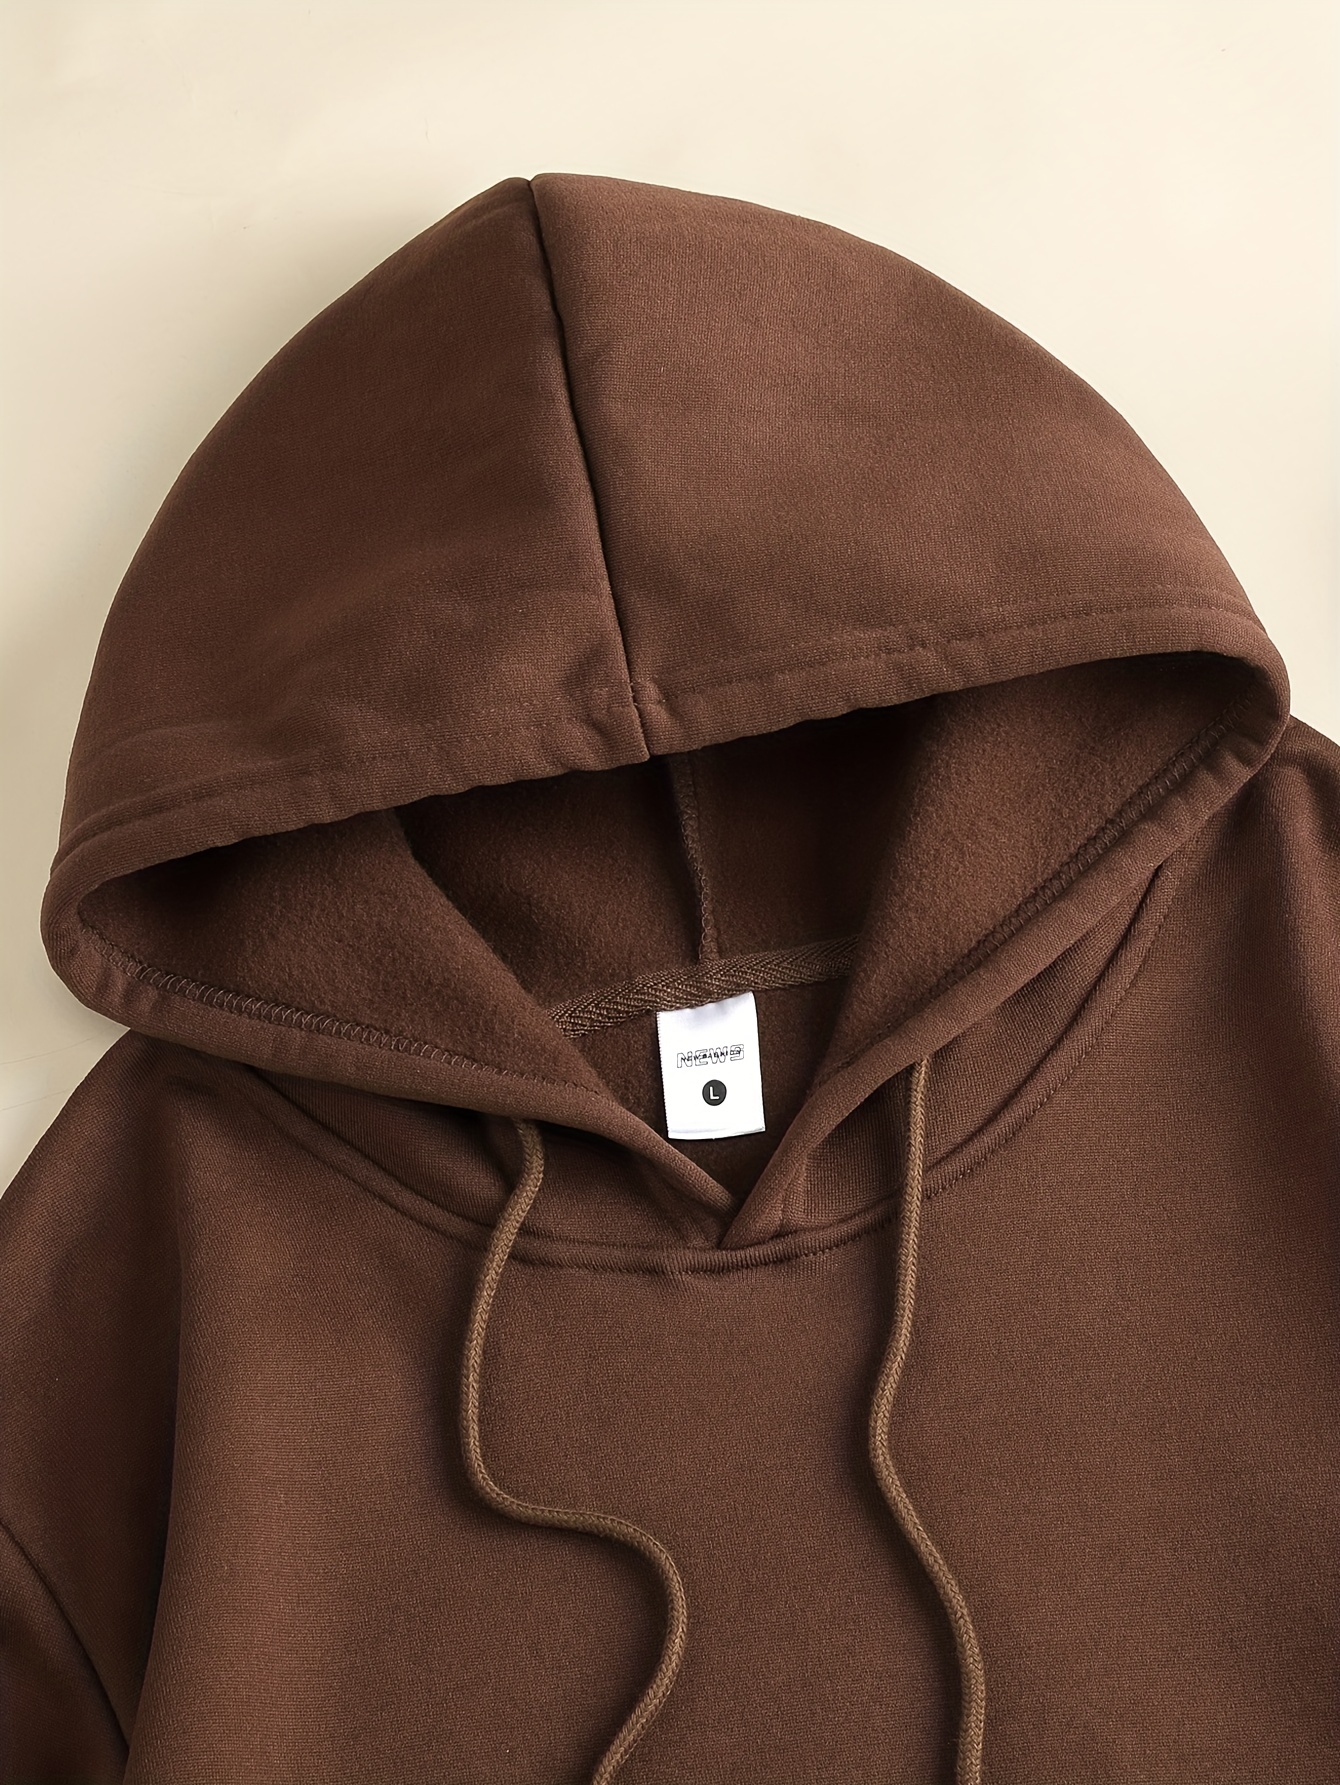 solid color hoodies for men hoodie with kangaroo pocket comfy loose trendy hooded pullover mens clothing for autumn winter details 9